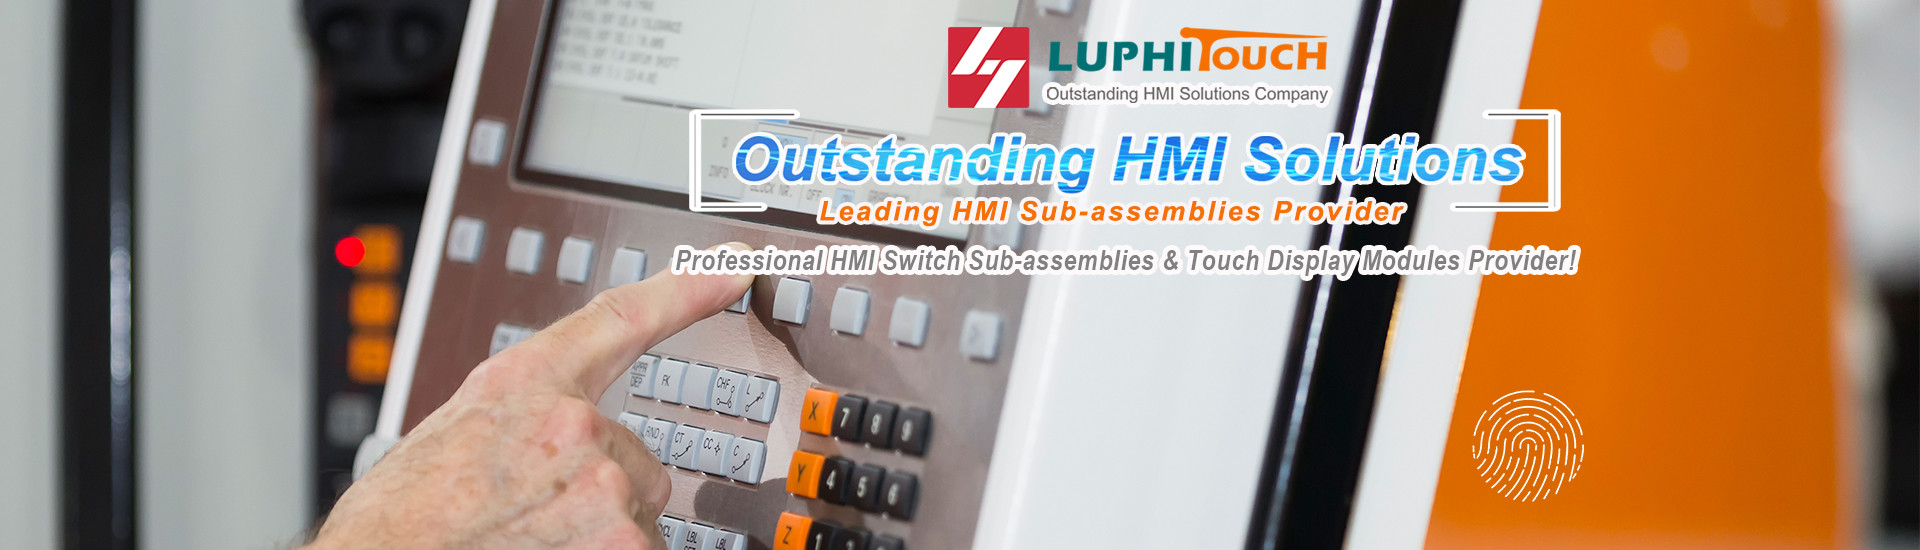  Outstanding HMI Solutions